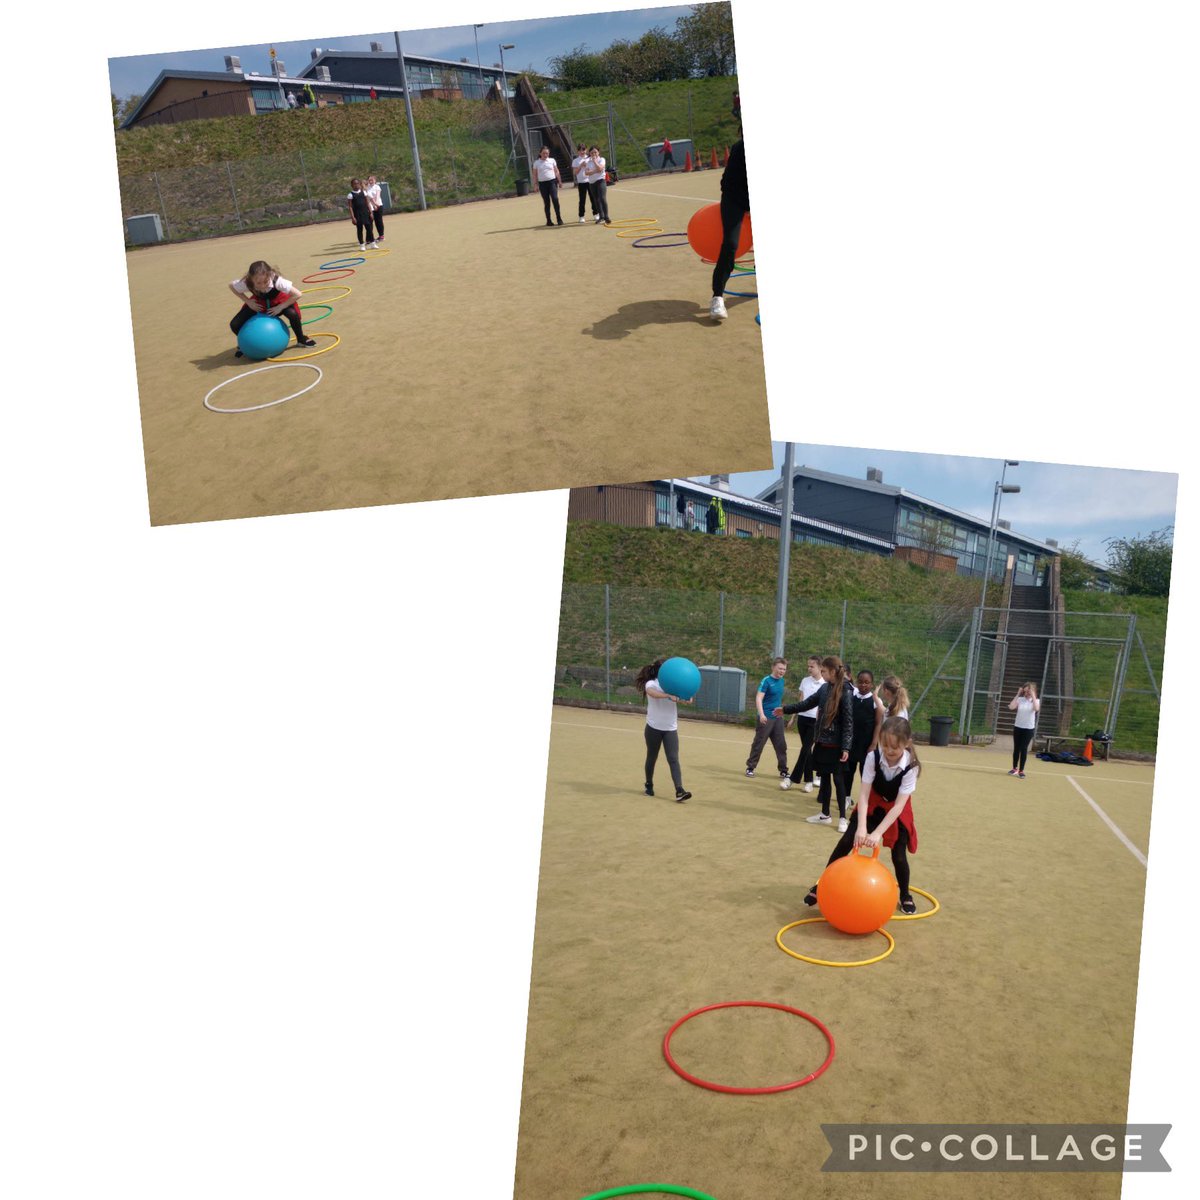 P6/5 showed great imagination and teamwork on the pitch when they created a new game together! 👏